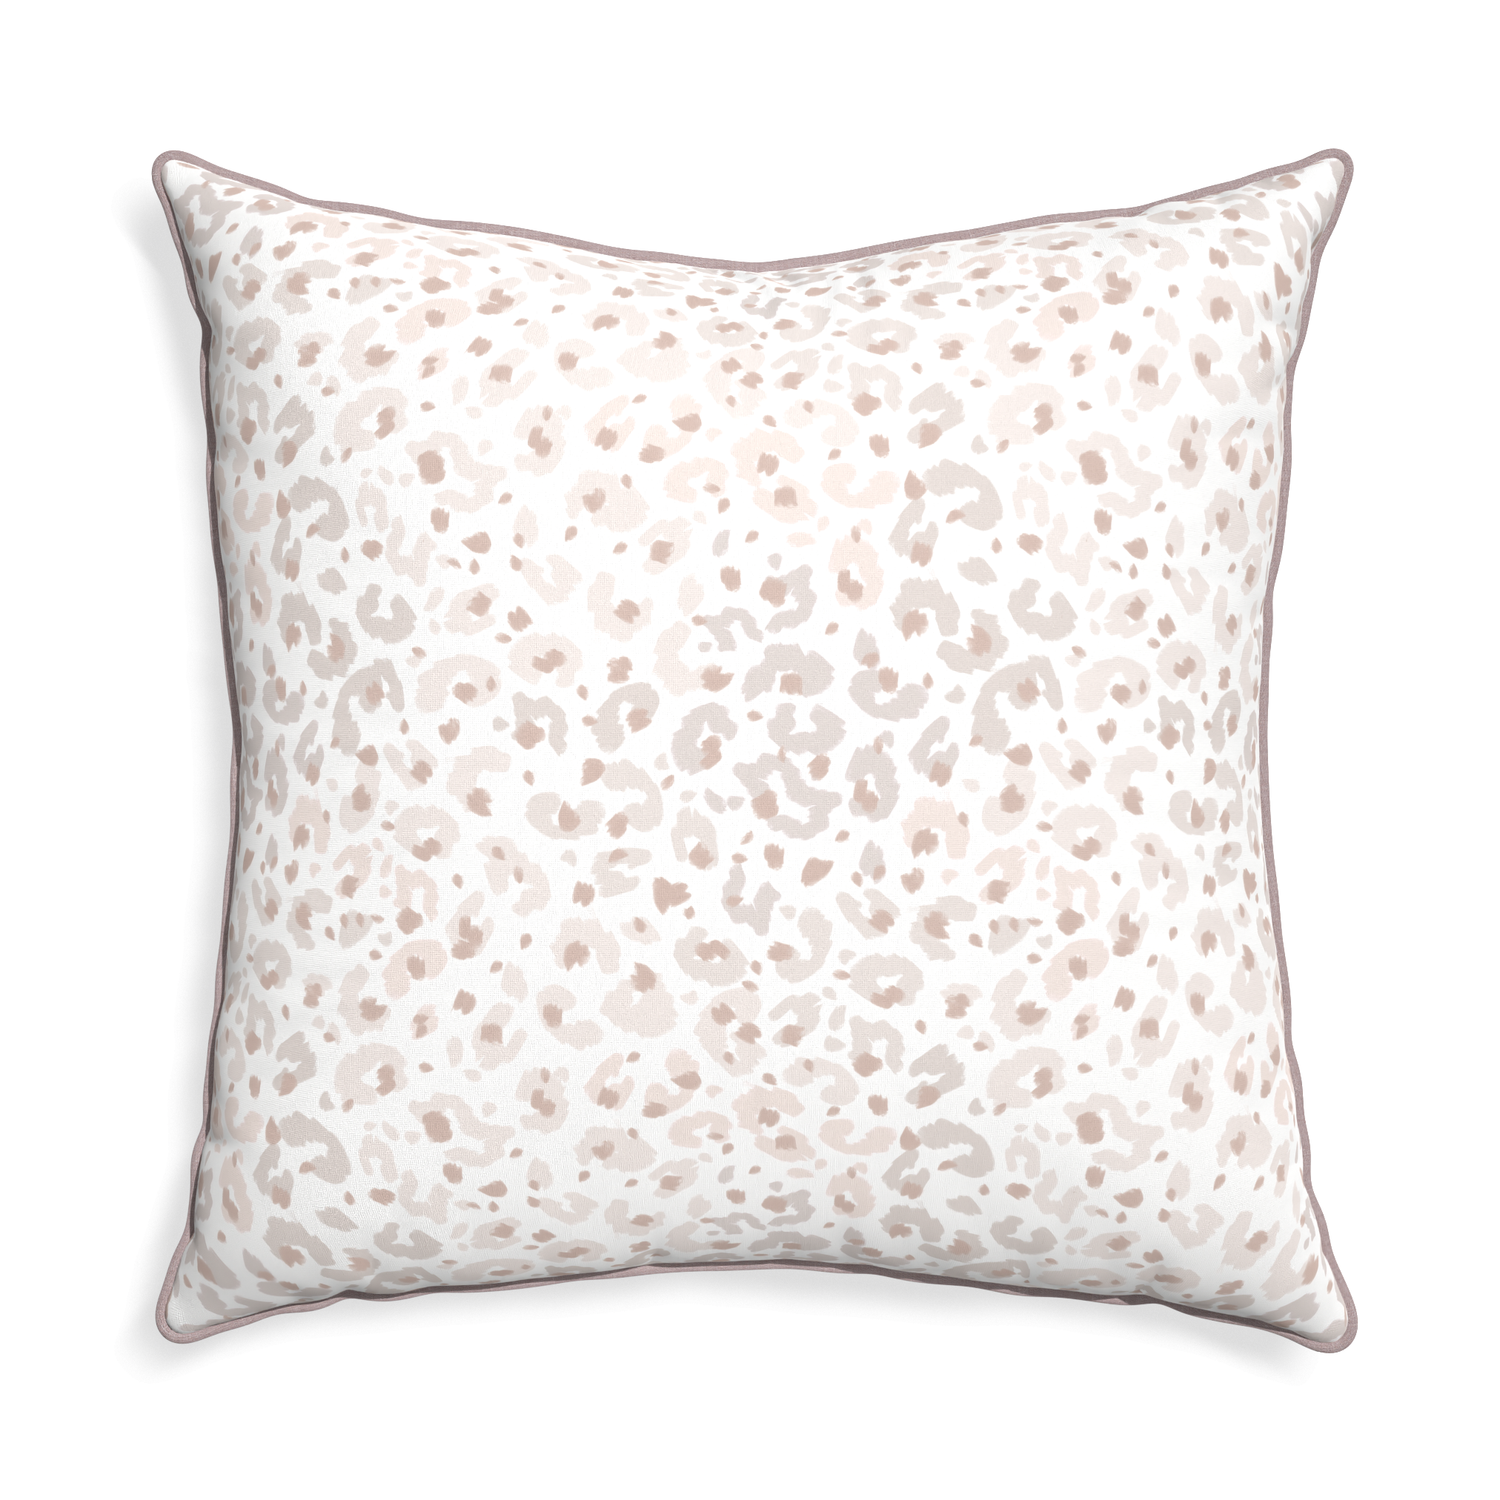 Euro-sham rosie custom beige animal printpillow with orchid piping on white background